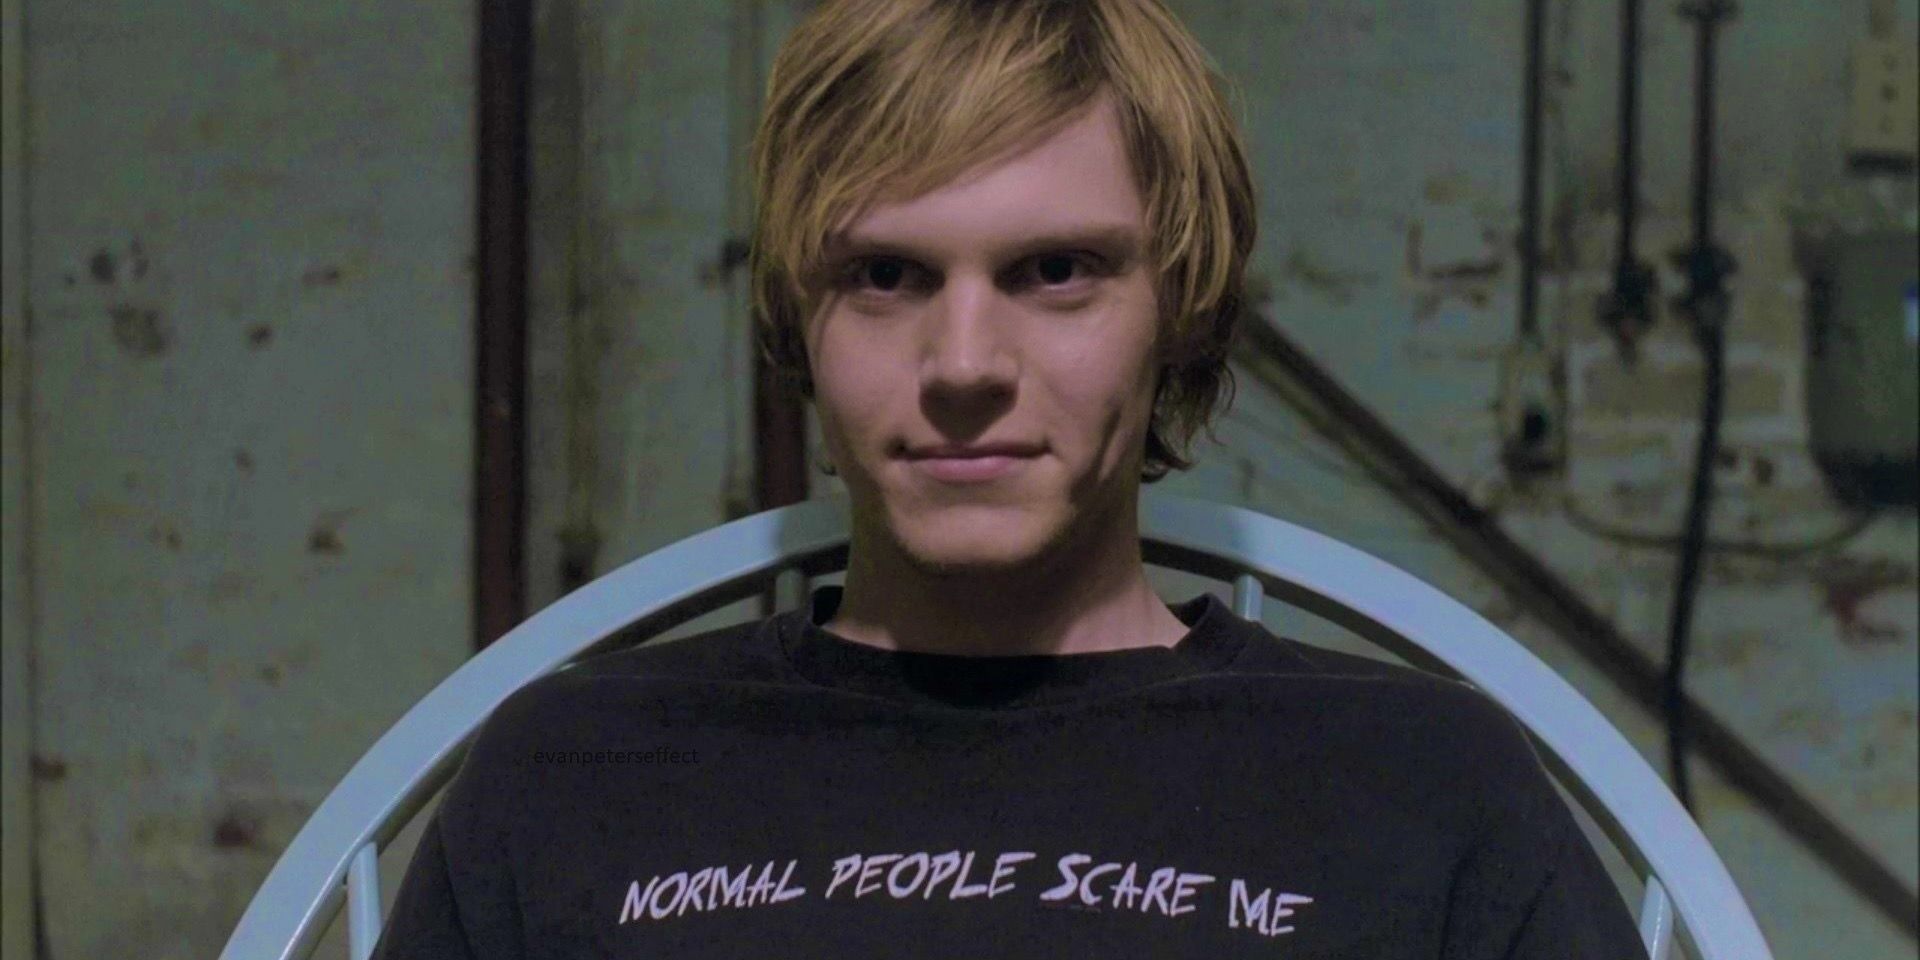 american horror story tate normal people scare me